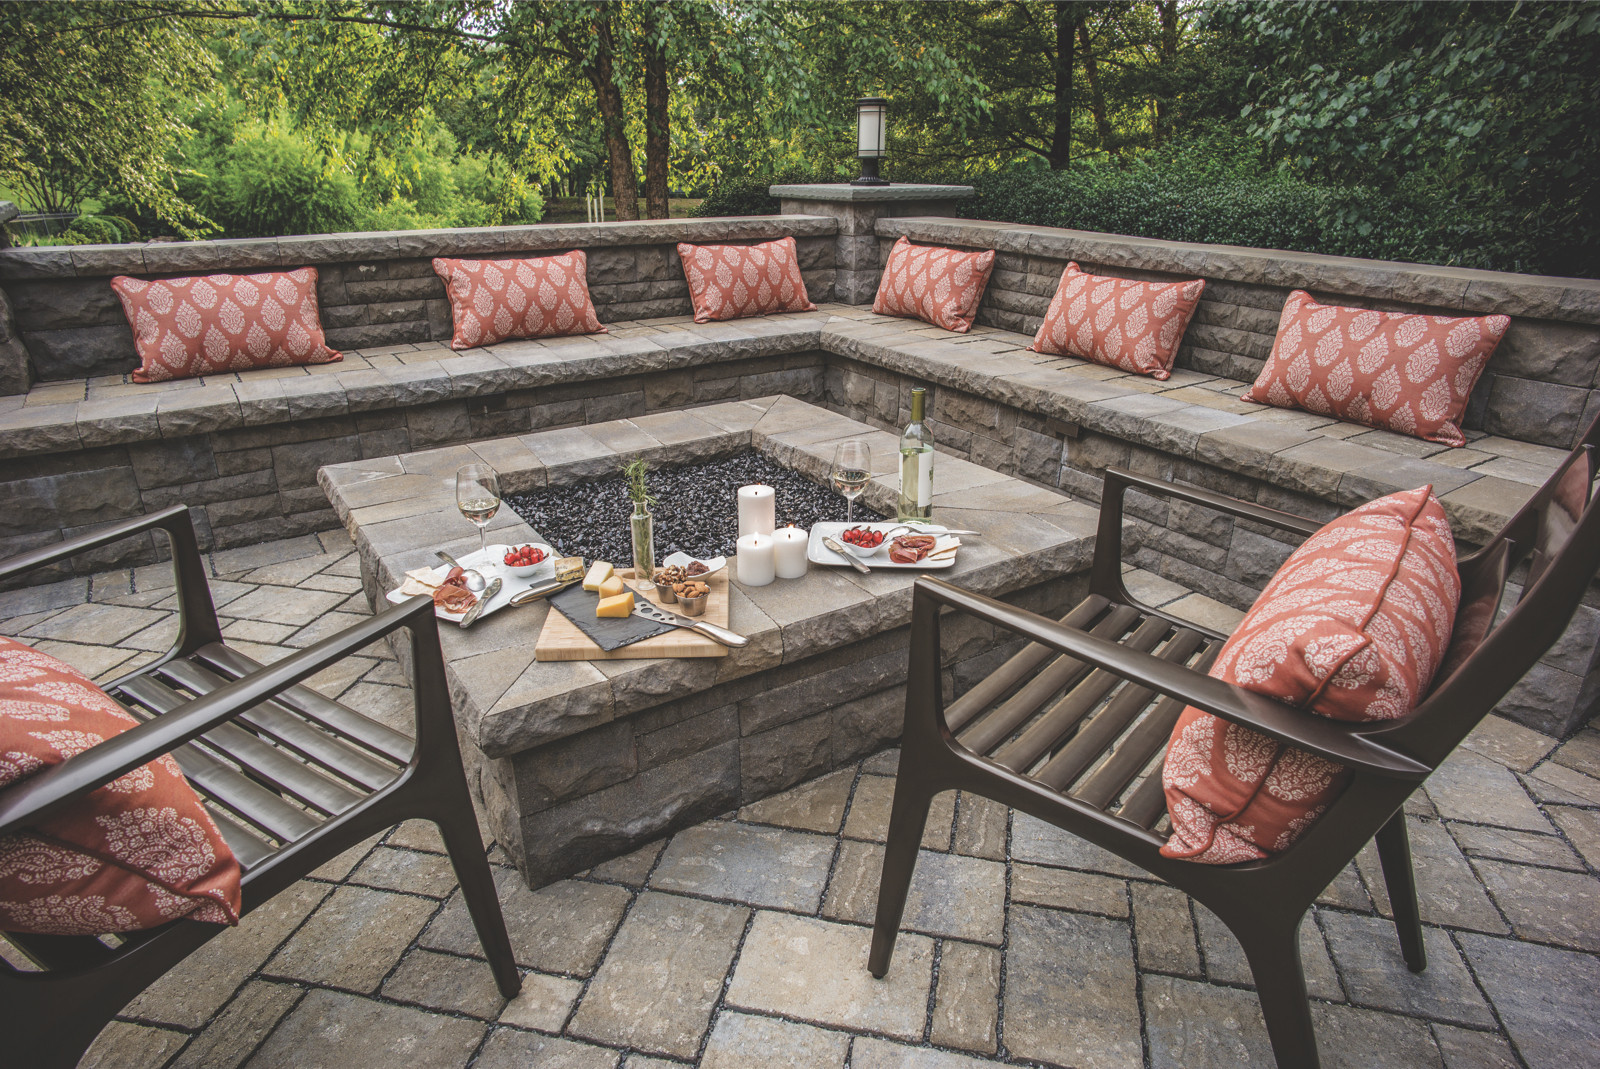 Patio With Fire Pit Ideas
 Turn Up the Heat with These Cozy Fire Pit Patio Design